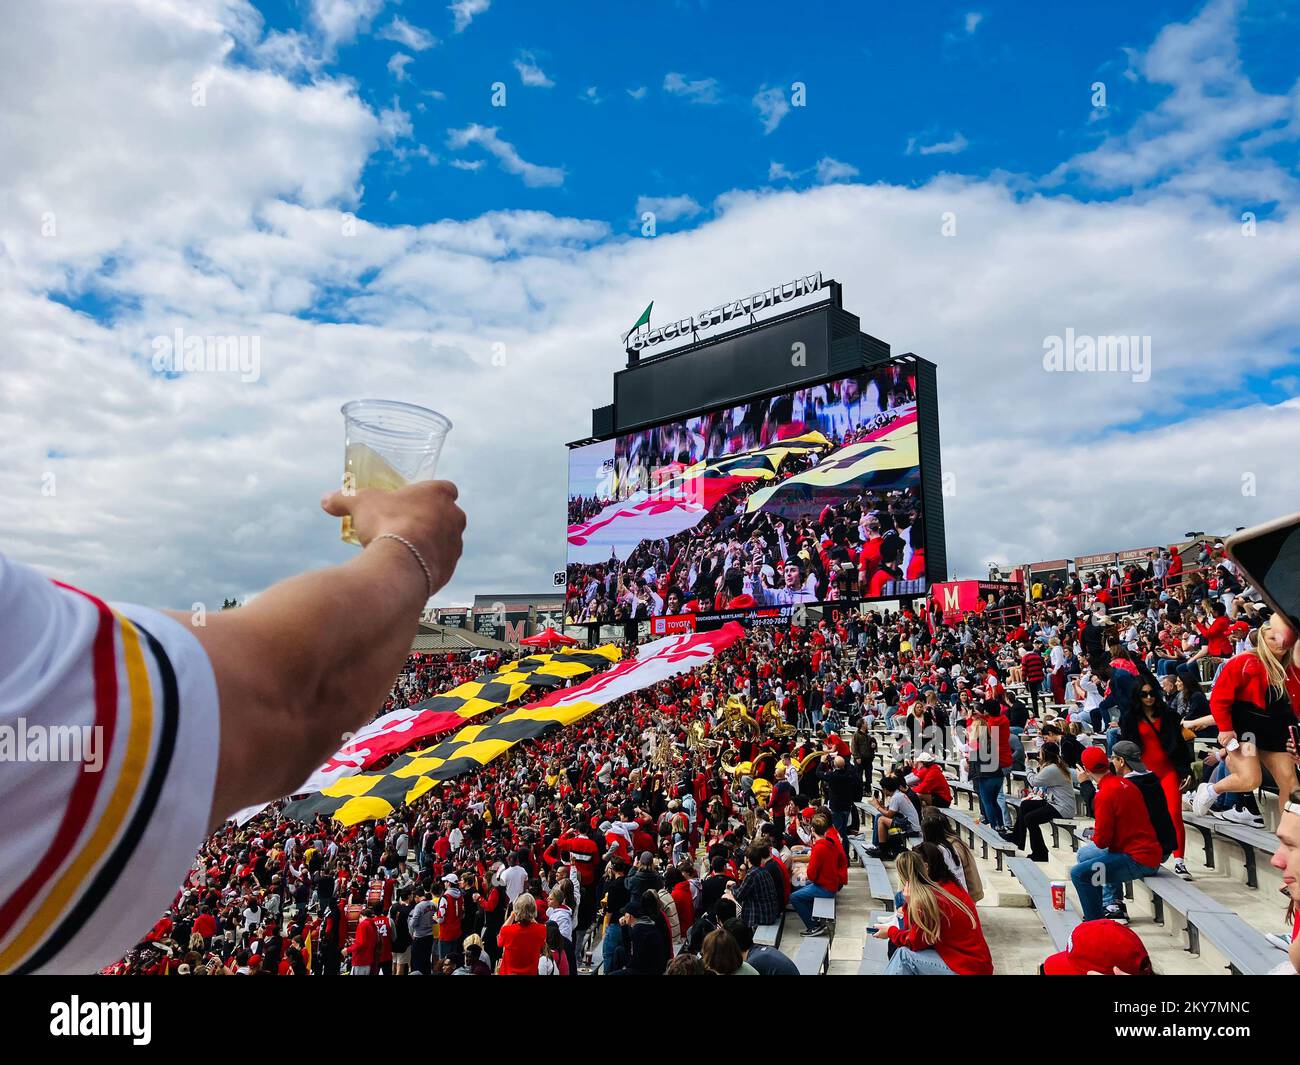 SECU Stadium is an outdoor athletic stadium on the campus of the University of Maryland in College Park, Maryland. Terrapin Football Game. Stock Photo